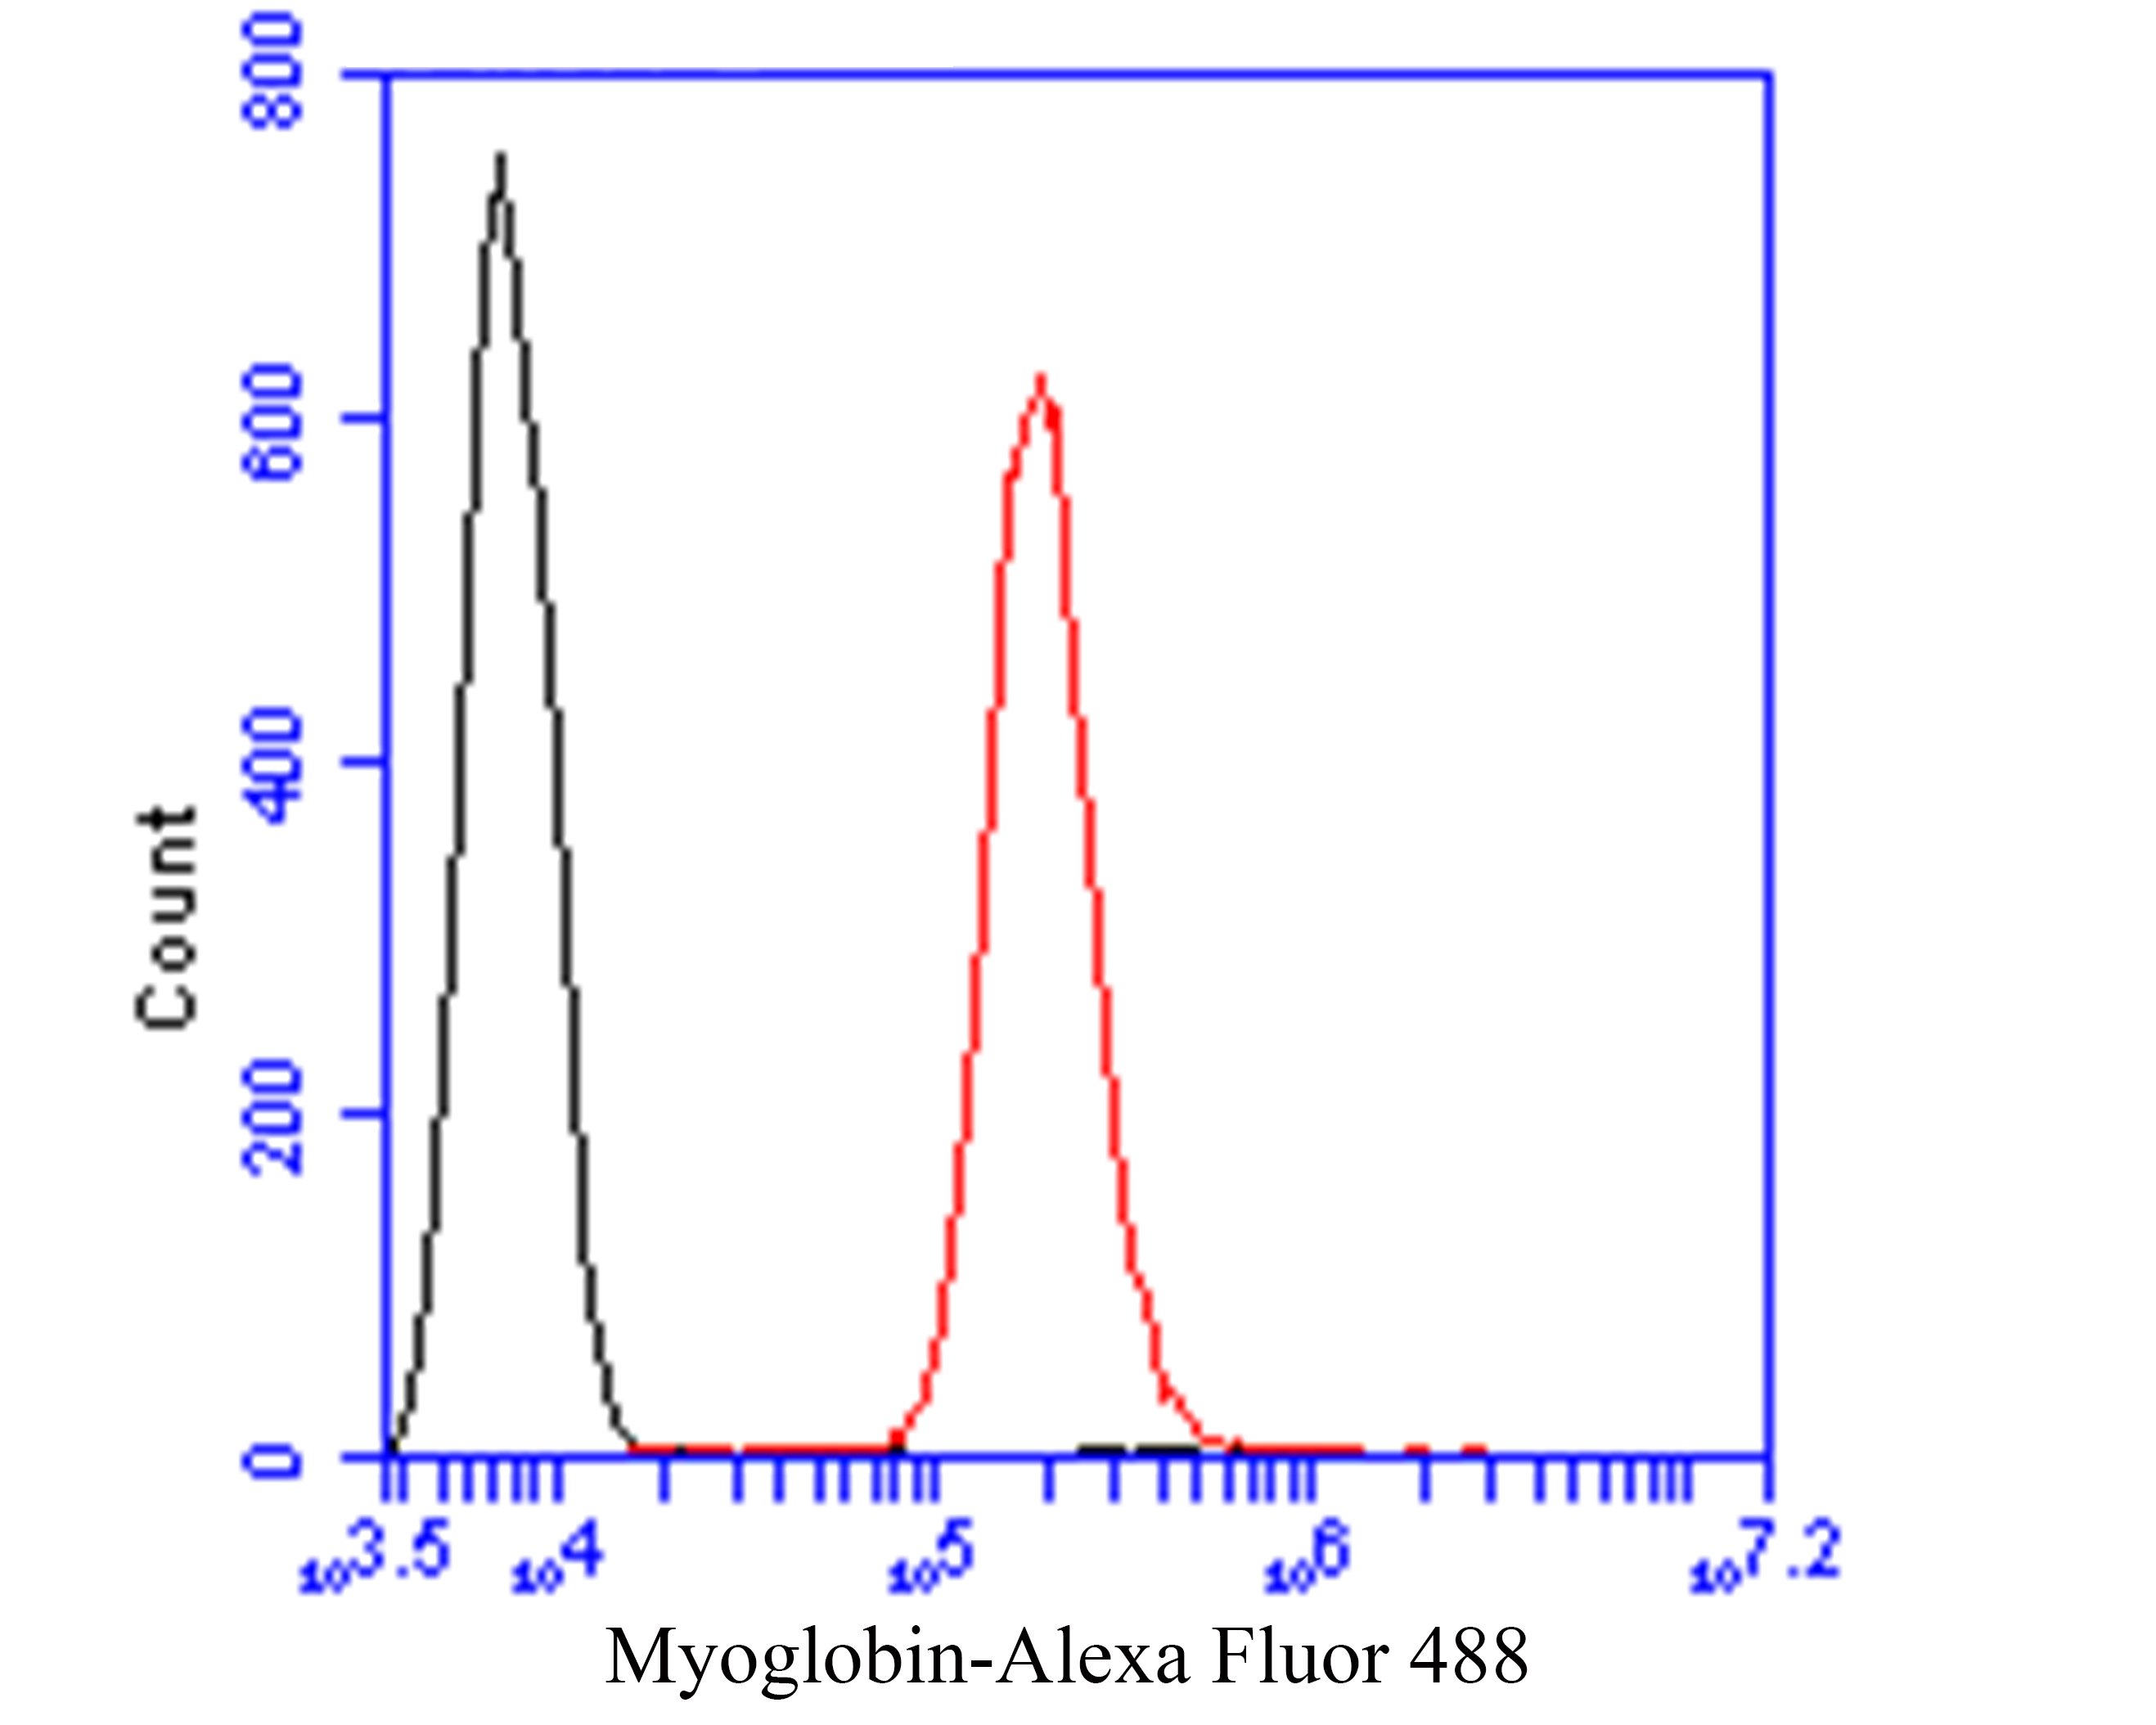 Flow cytometric analysis of Myoglobin was done on SiHa cells. The cells were fixed, permeabilized and stained with the primary antibody (ER1901-17, 1/50) (red). After incubation of the primary antibody at room temperature for an hour, the cells were stained with a Alexa Fluor 488-conjugated Goat anti-Rabbit IgG Secondary antibody at 1/1000 dilution for 30 minutes.Unlabelled sample was used as a control (cells without incubation with primary antibody; black).